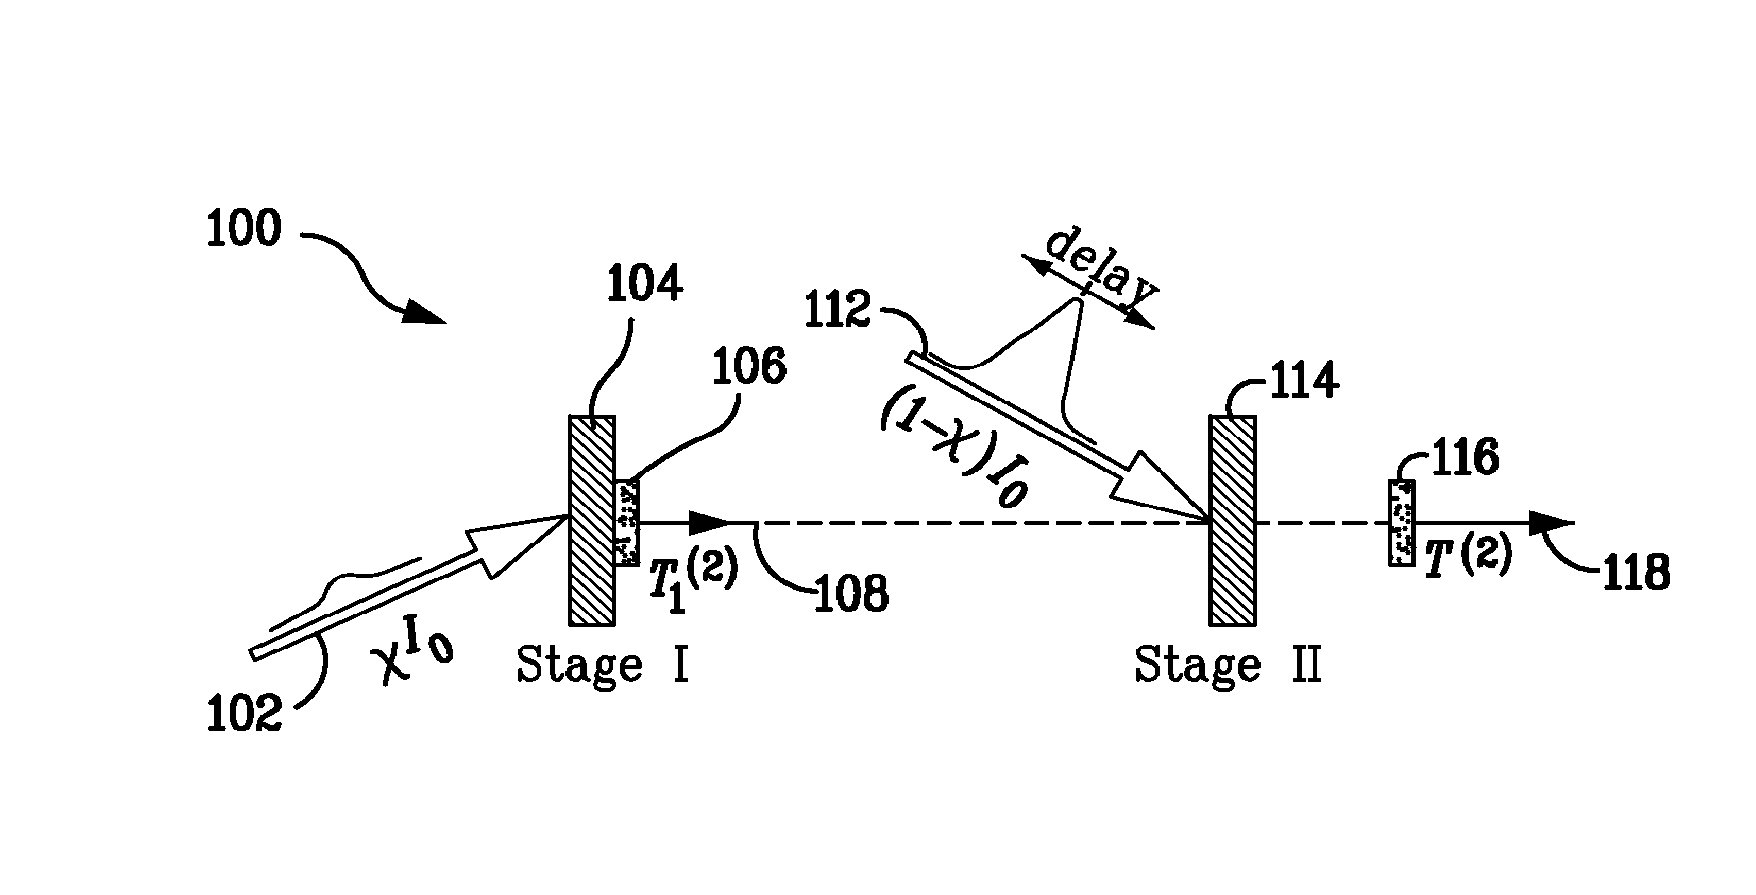 Methods and systems for increasing the energy of positive ions accelerated by high-power lasers